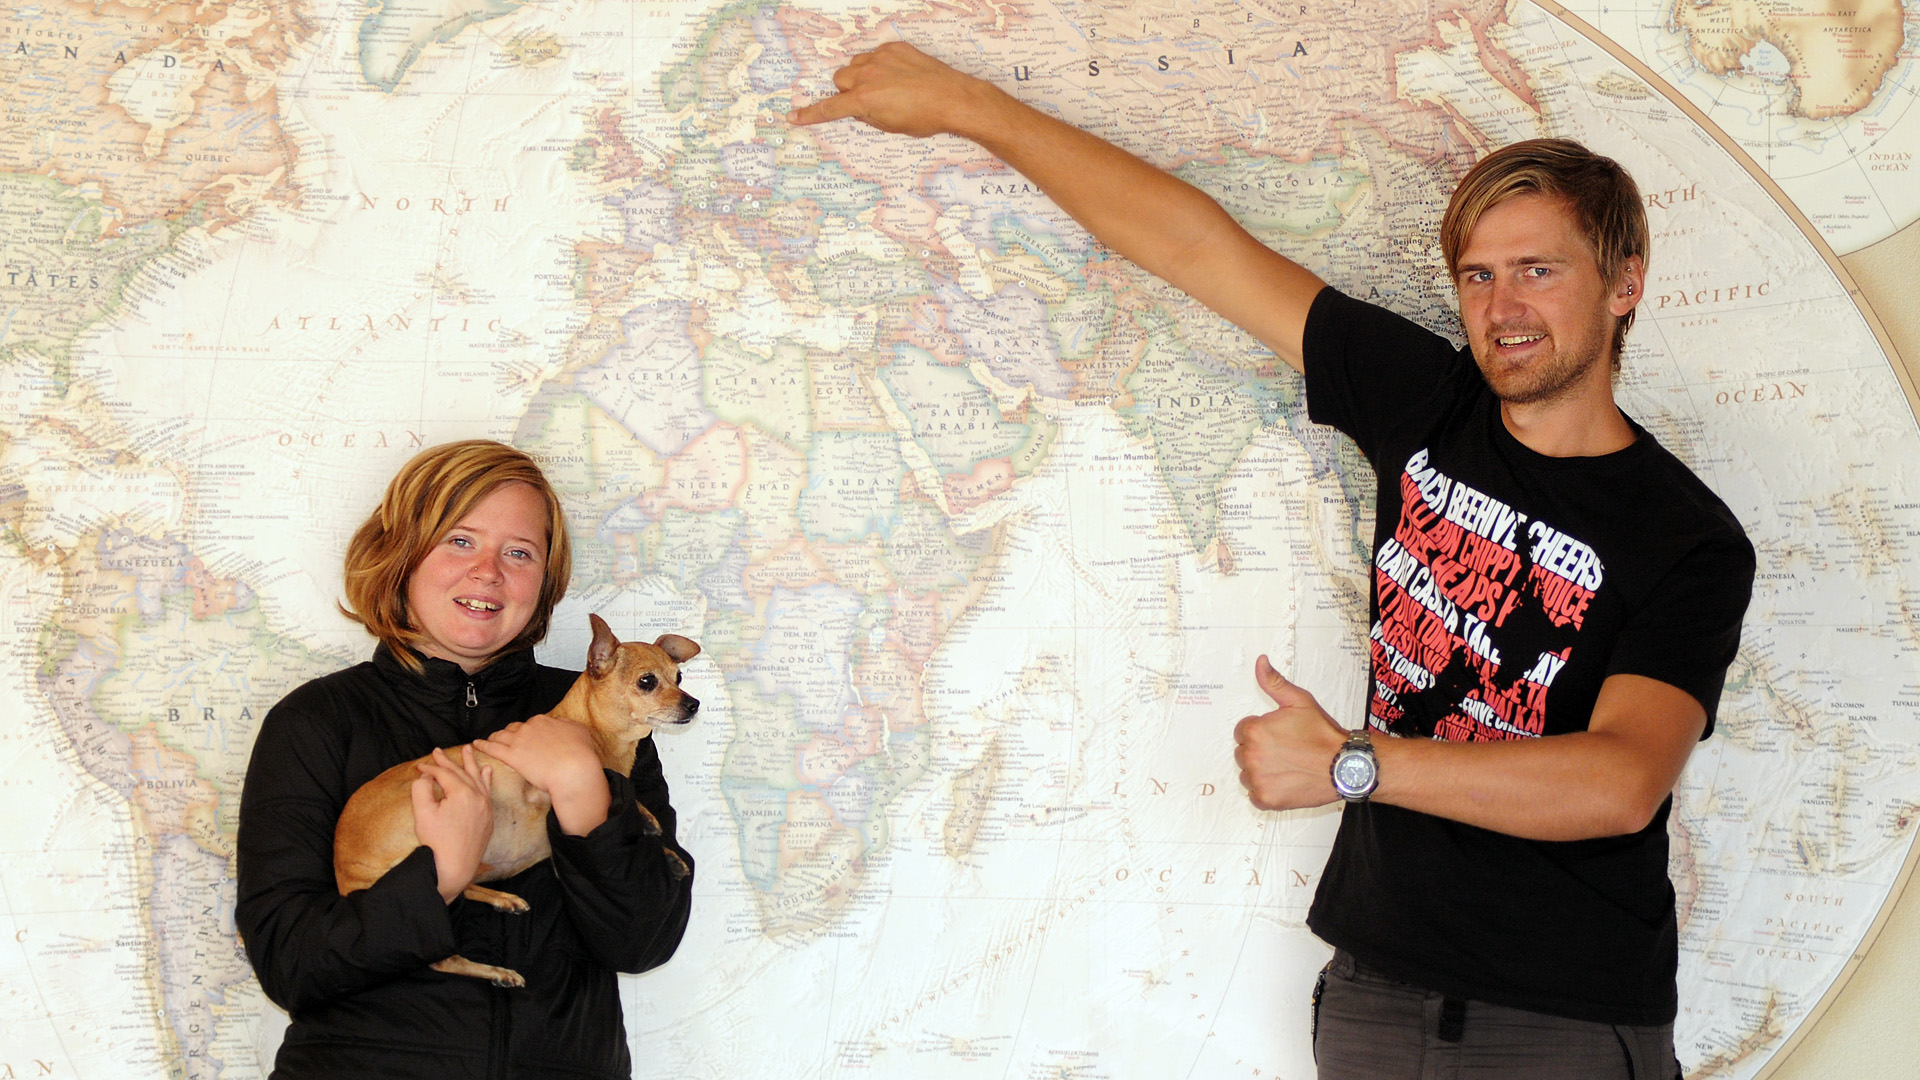 Vineta, Tiki & Krisjanis in front of a large world map. Vineta is holding Tiki and Krisjanis is pointing to Riga, Latvia on the world map